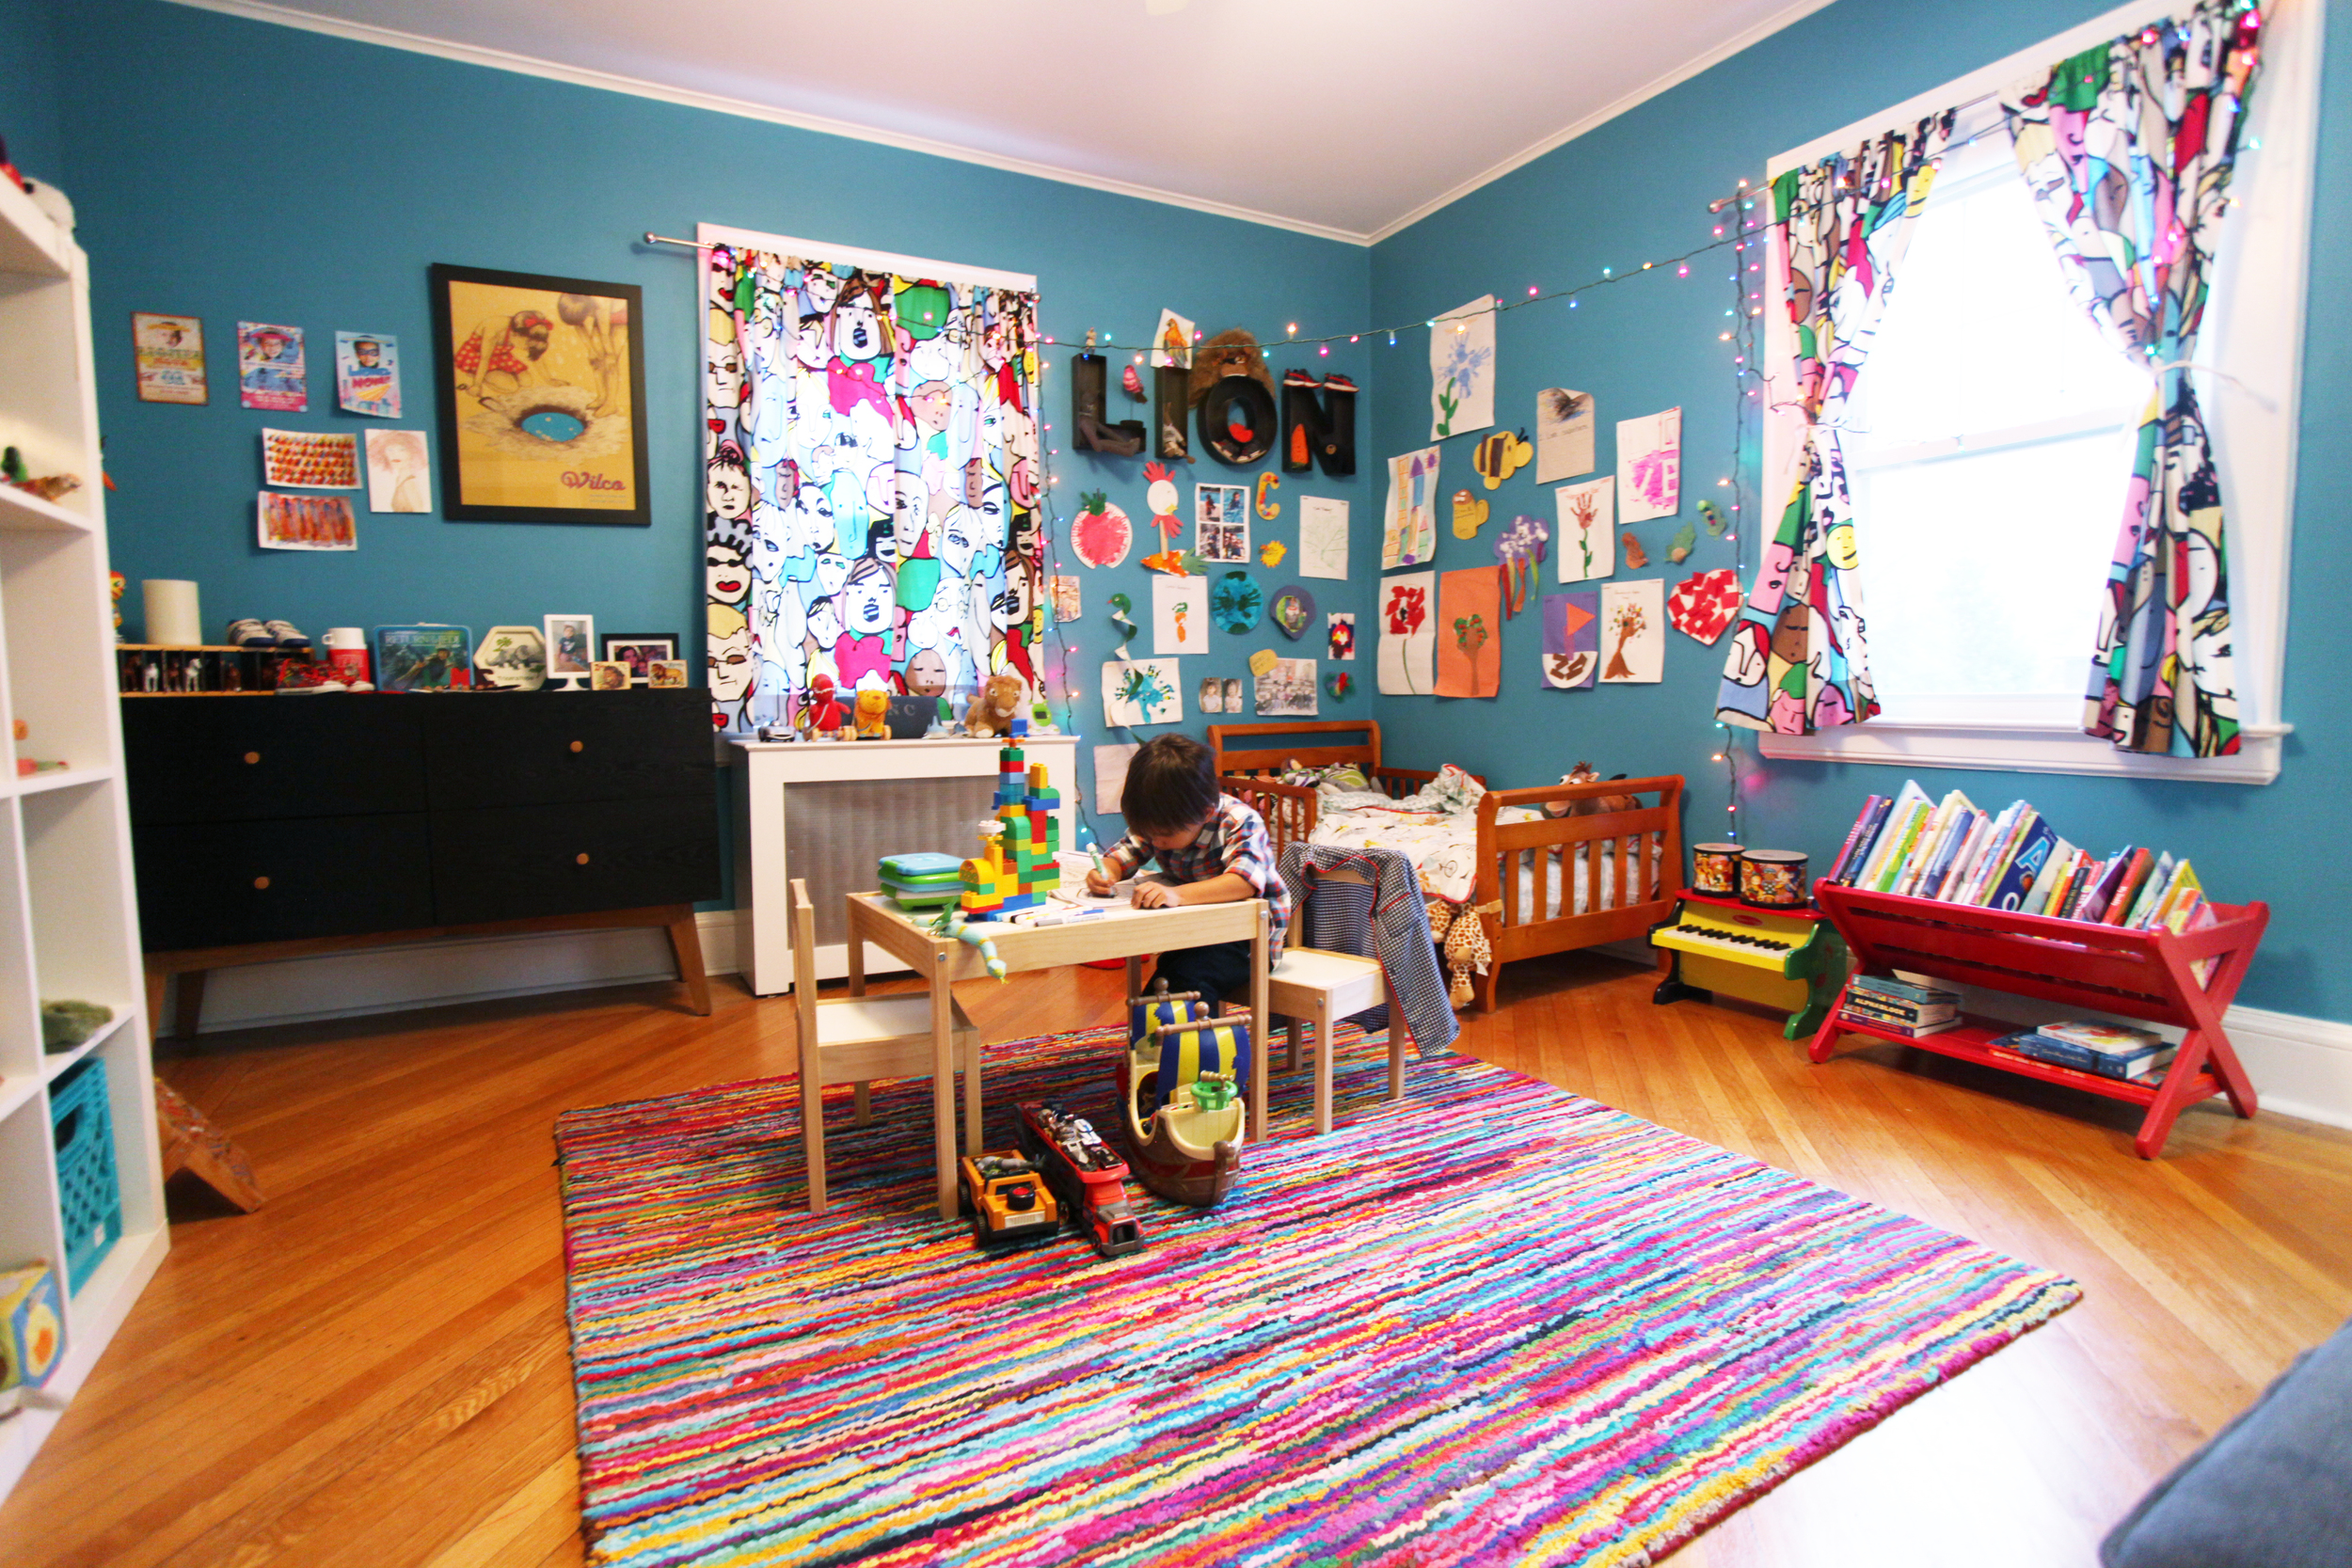  Creativity and play is fostered by a center art-table and gallery-like walls.&nbsp; 